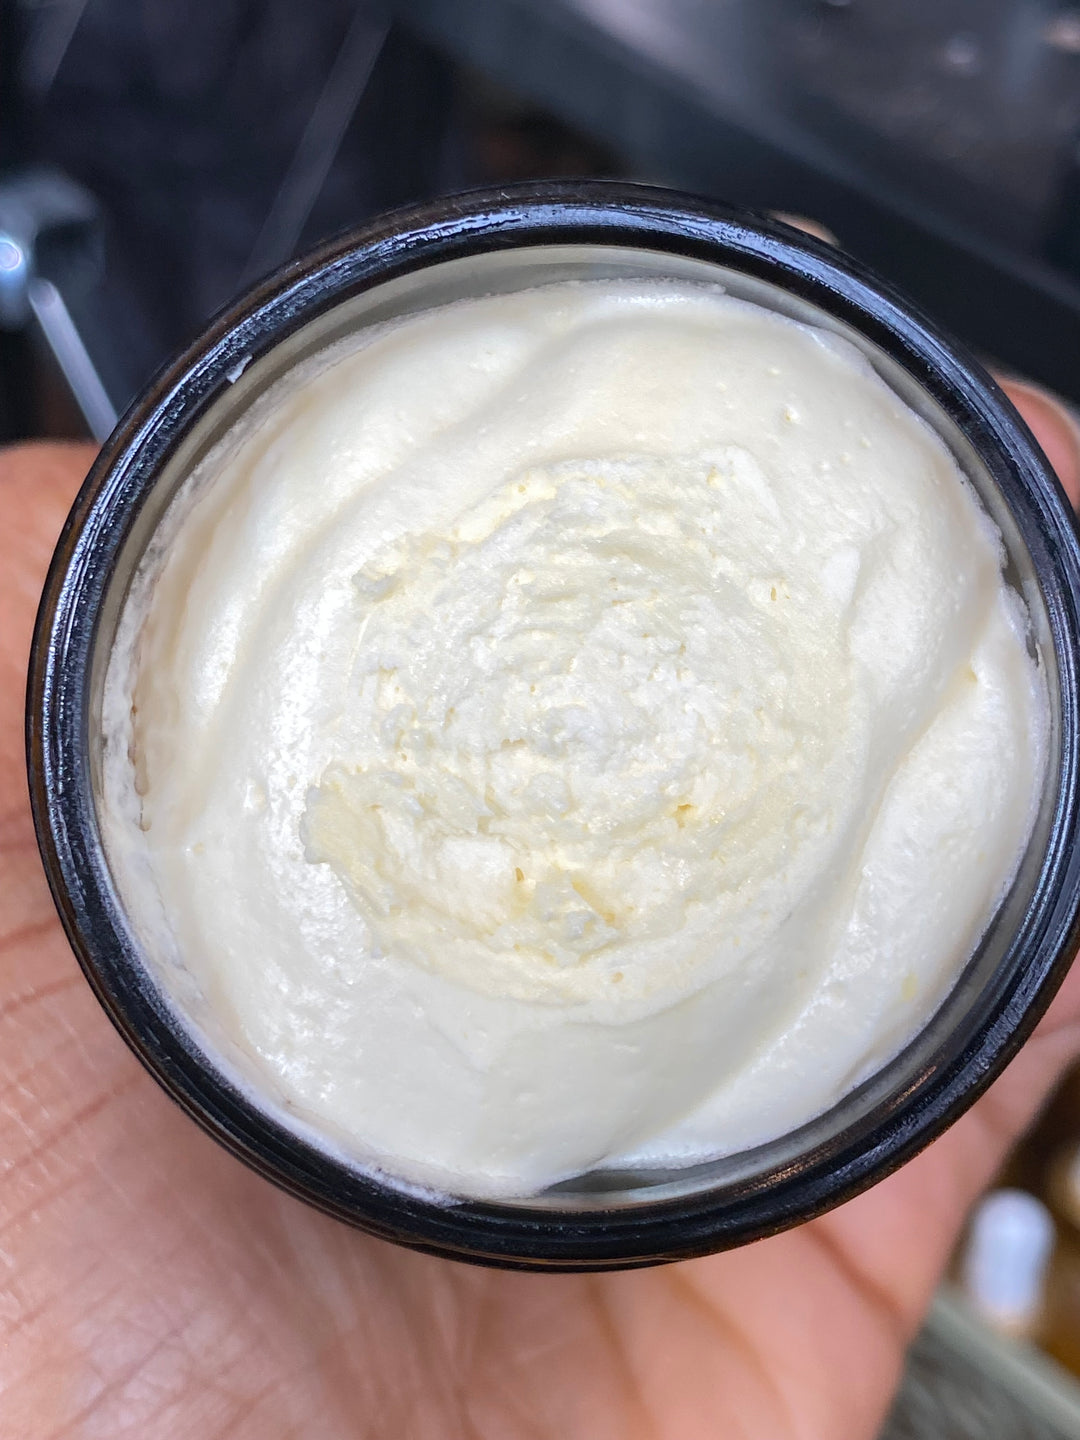 NOUD Whipped Body Butter